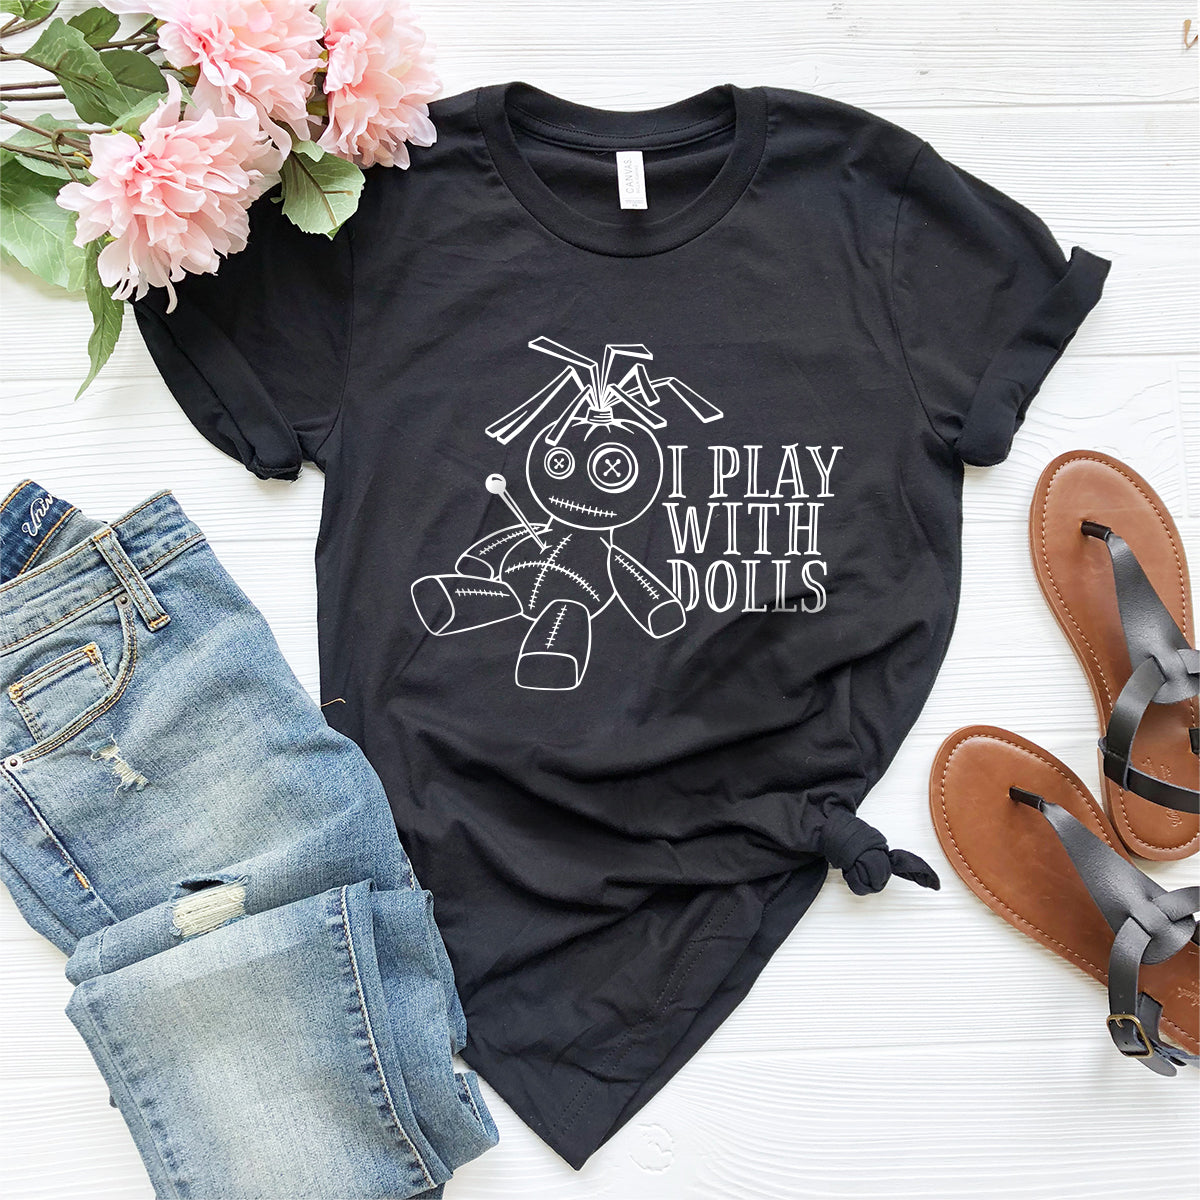 I Play With Dolls Halloween T-Shirt, Funny Halloween Shirt, Voodoo Doll Shirt, Voodoo Doll Halloween Gift, Voodoo Doll Halloween Graphic Tee - Fastdeliverytees.com